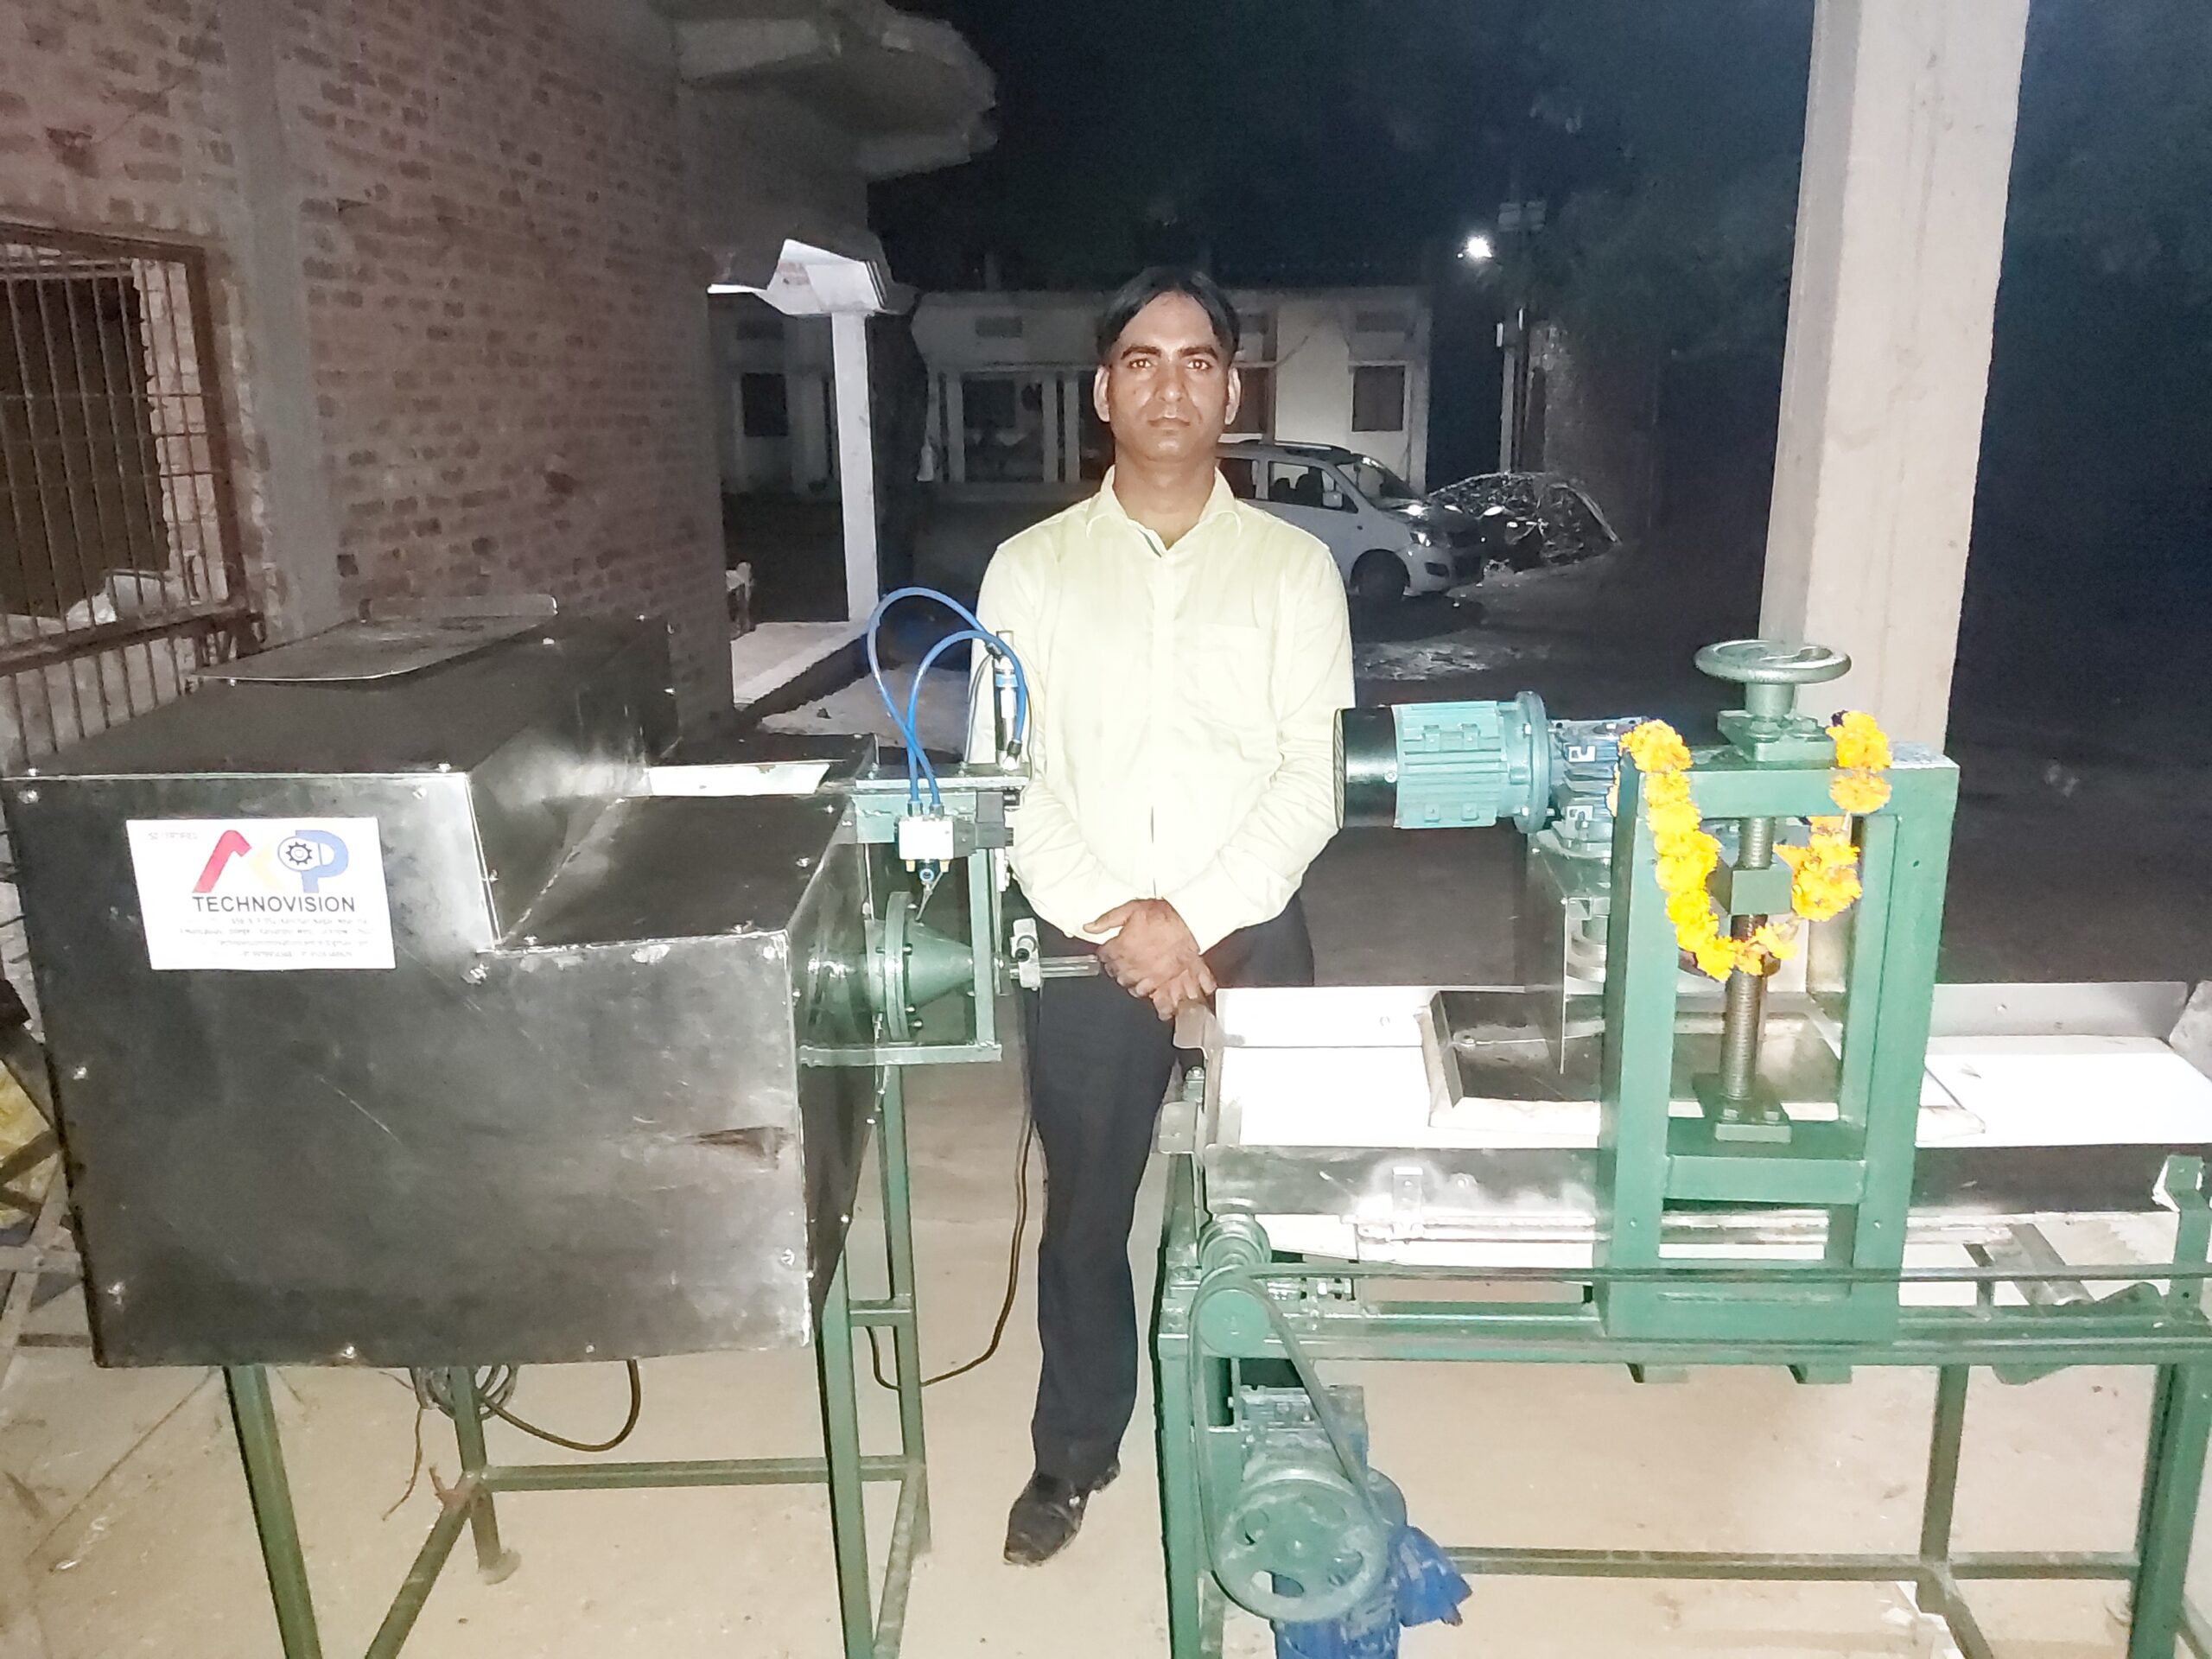 Anand Pandey with his laddu-making machine